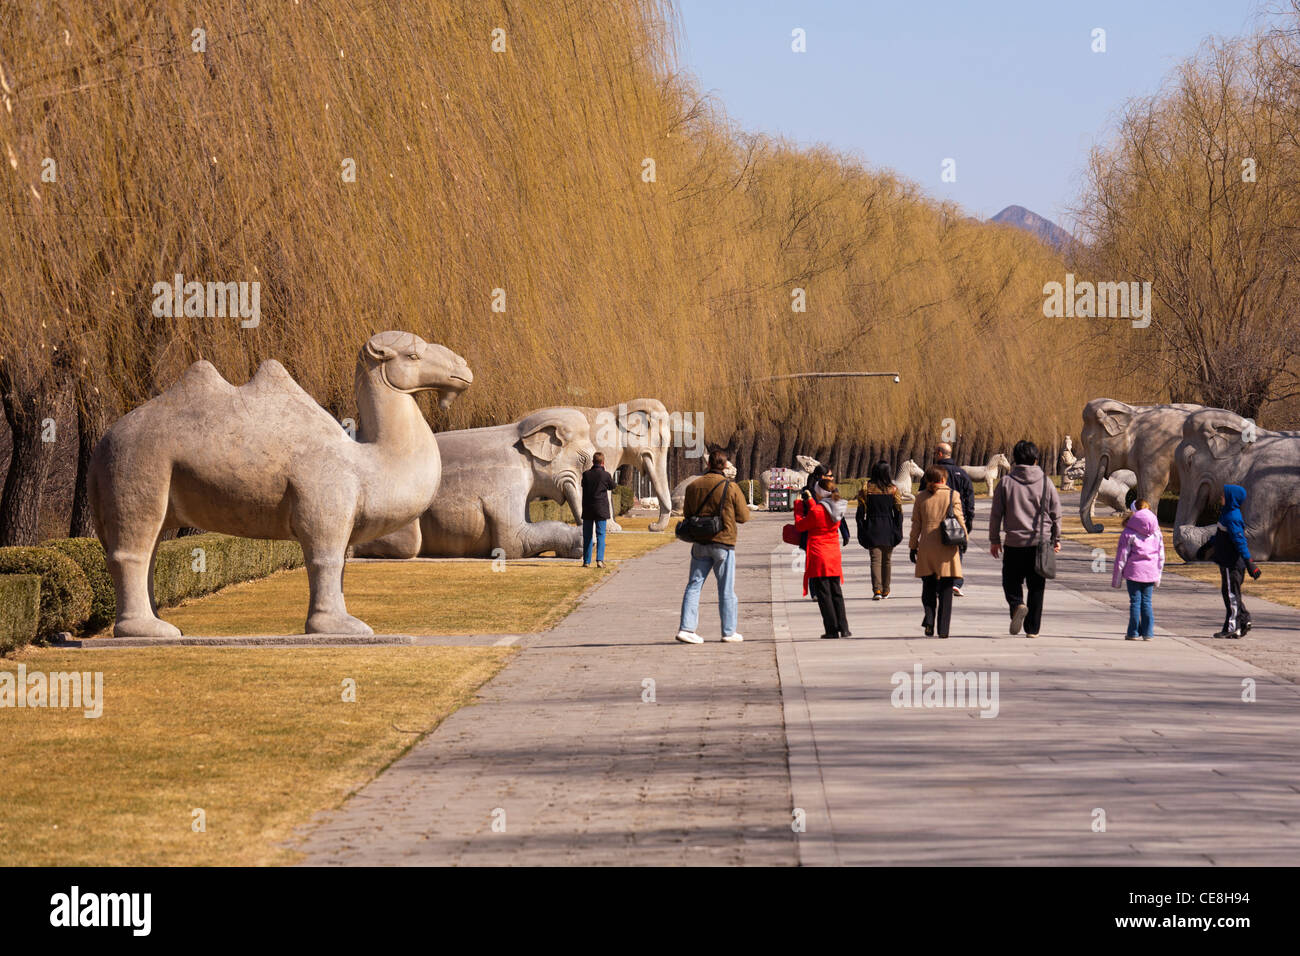 Sculptures on the Sacred or Spirit Way leading to the Ming Tombs outside Beijing, China. Stock Photo